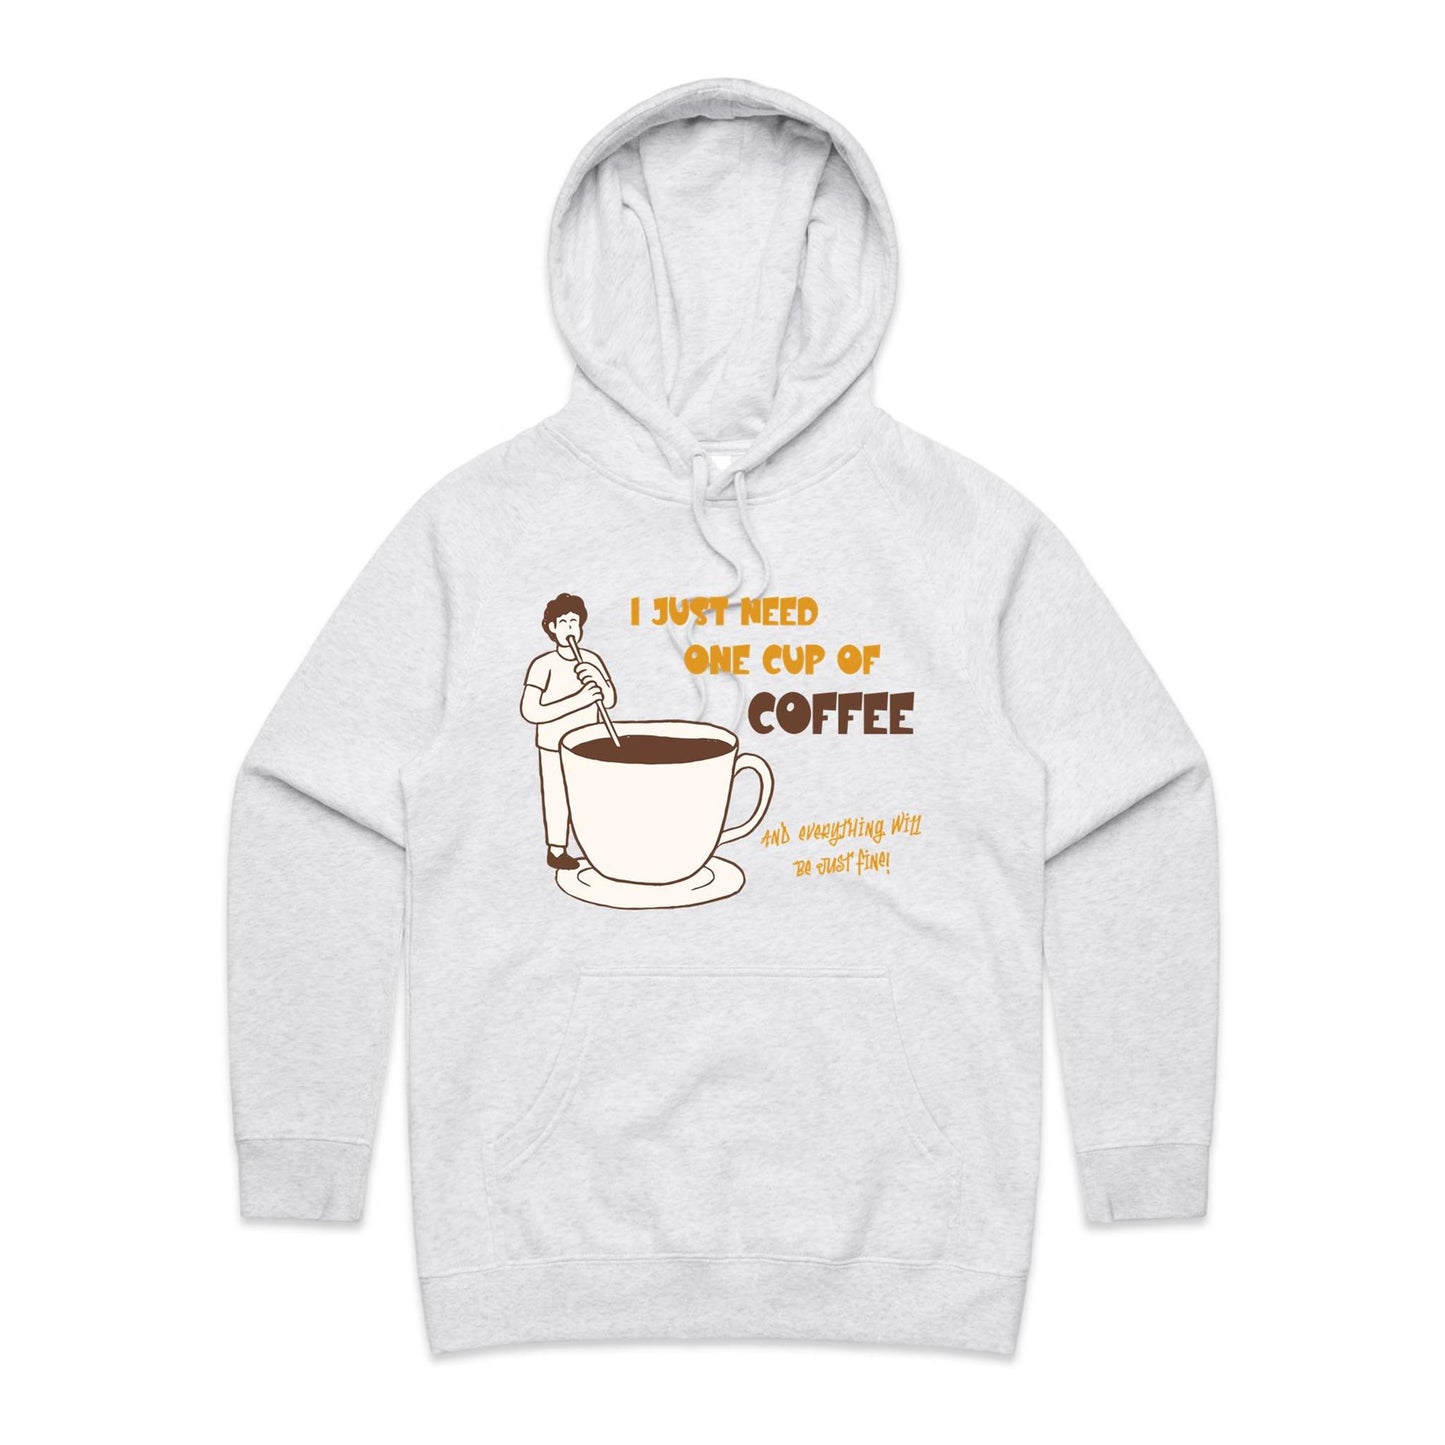 I Just Need One Cup Of Coffee And Everything Will Be Just Fine - Women's Supply Hood White Marle Womens Supply Hoodie Coffee